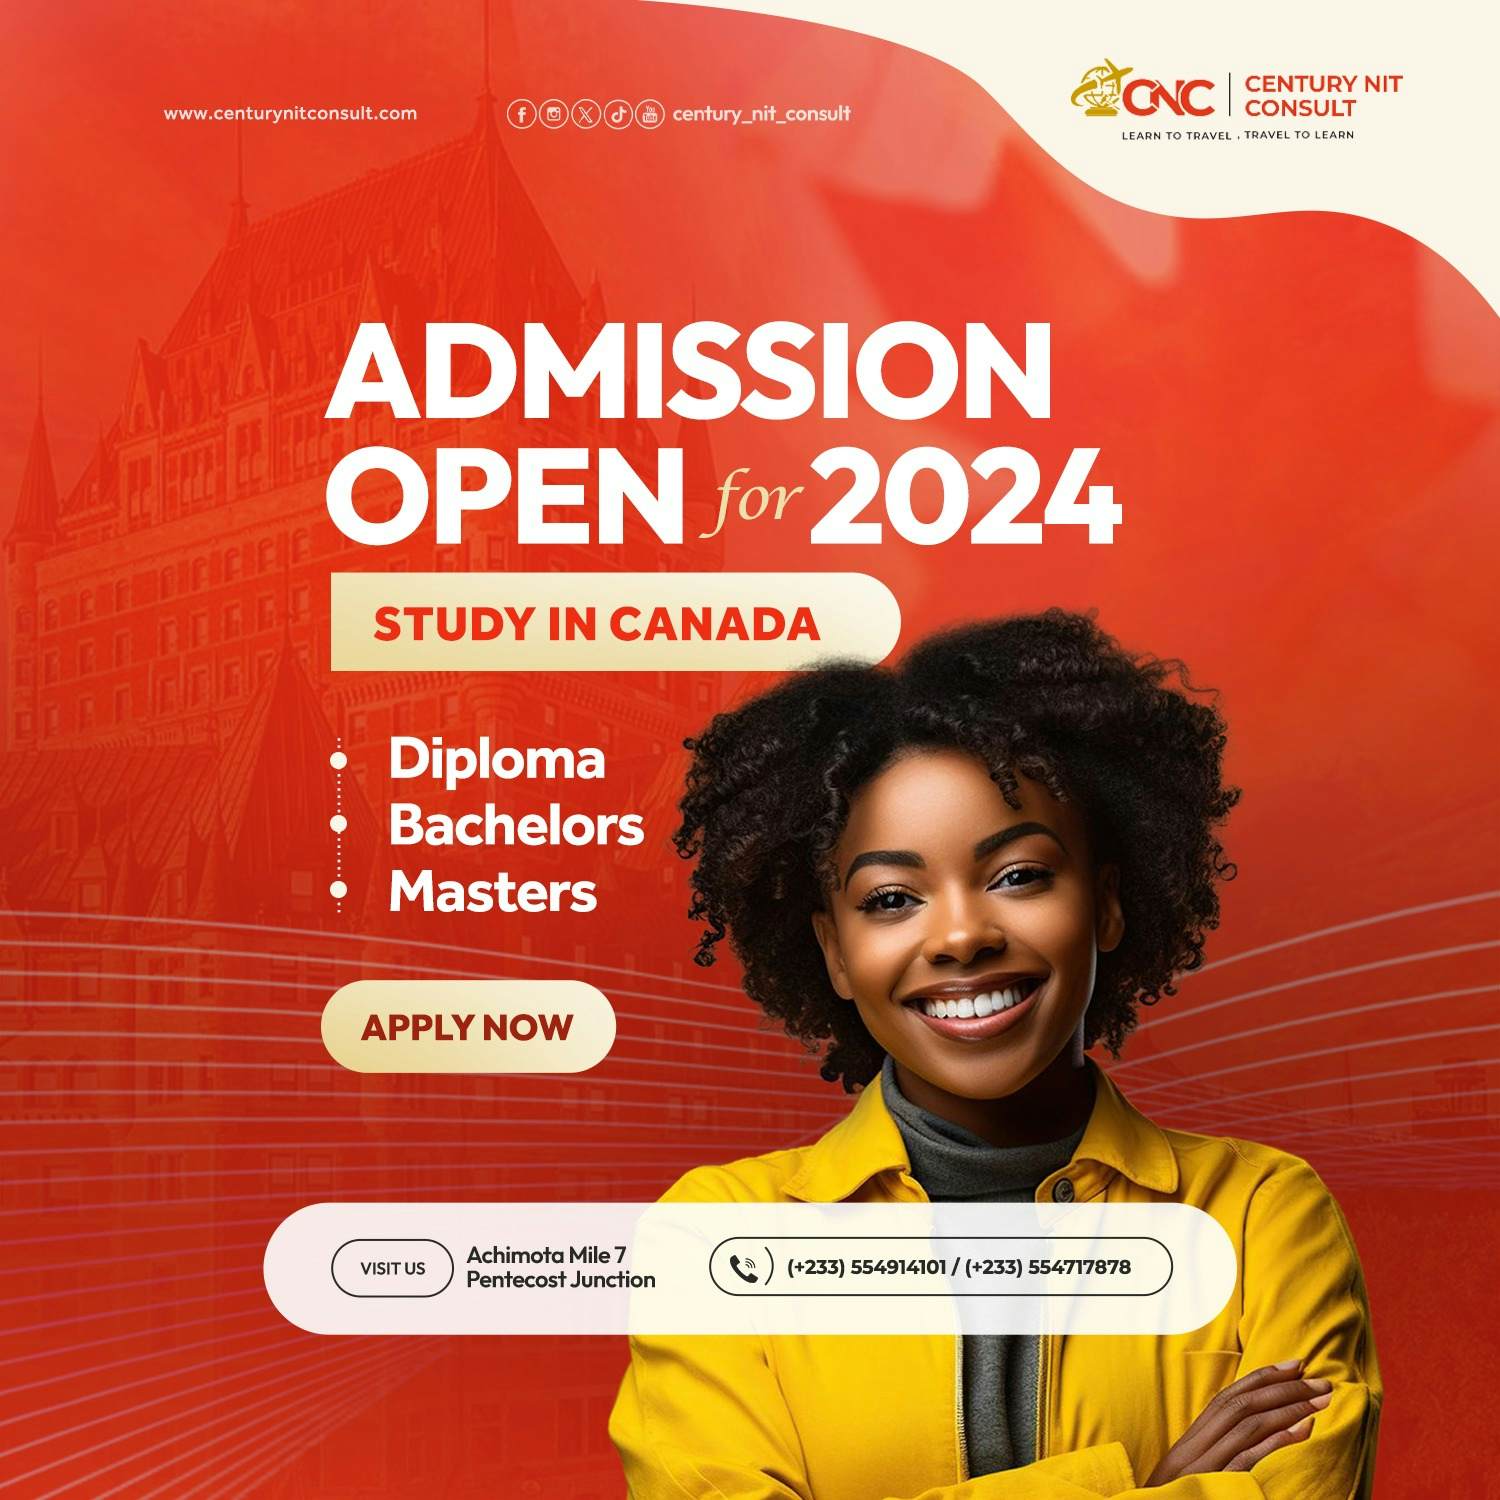 Admission is open for 2024 (study in Canada)